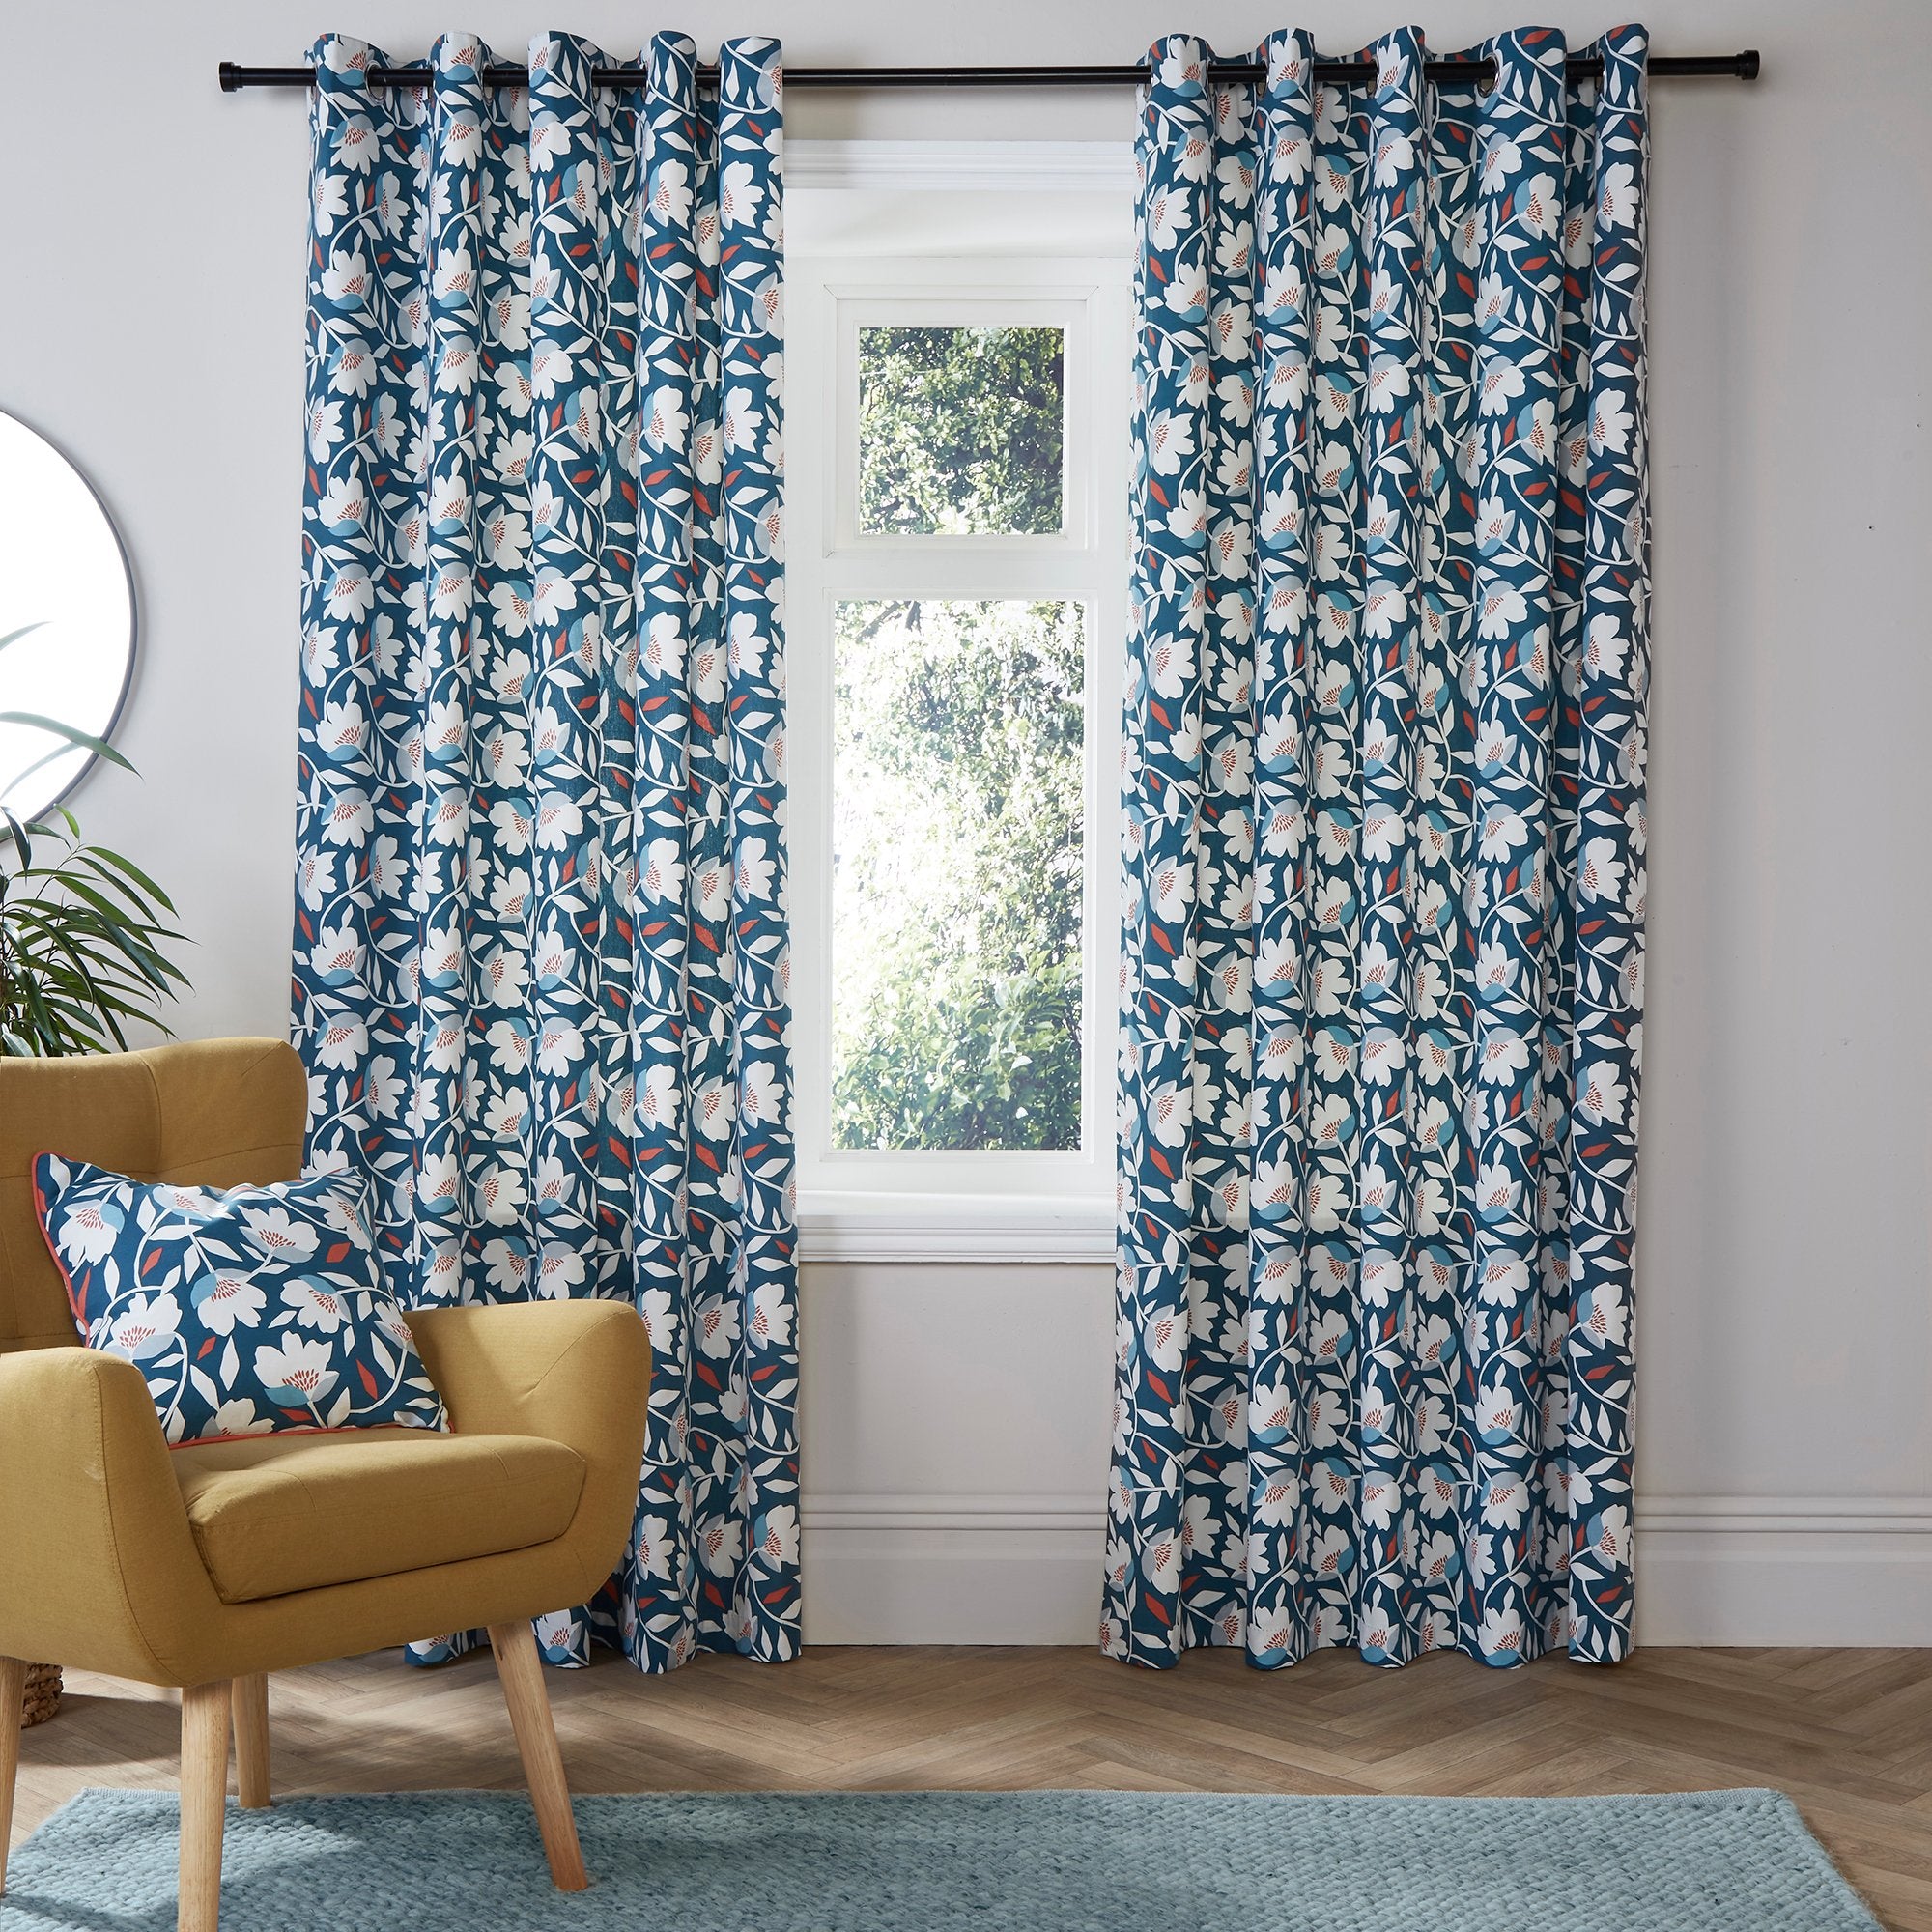 Pair of Eyelet Curtains Luna by Fusion in Teal